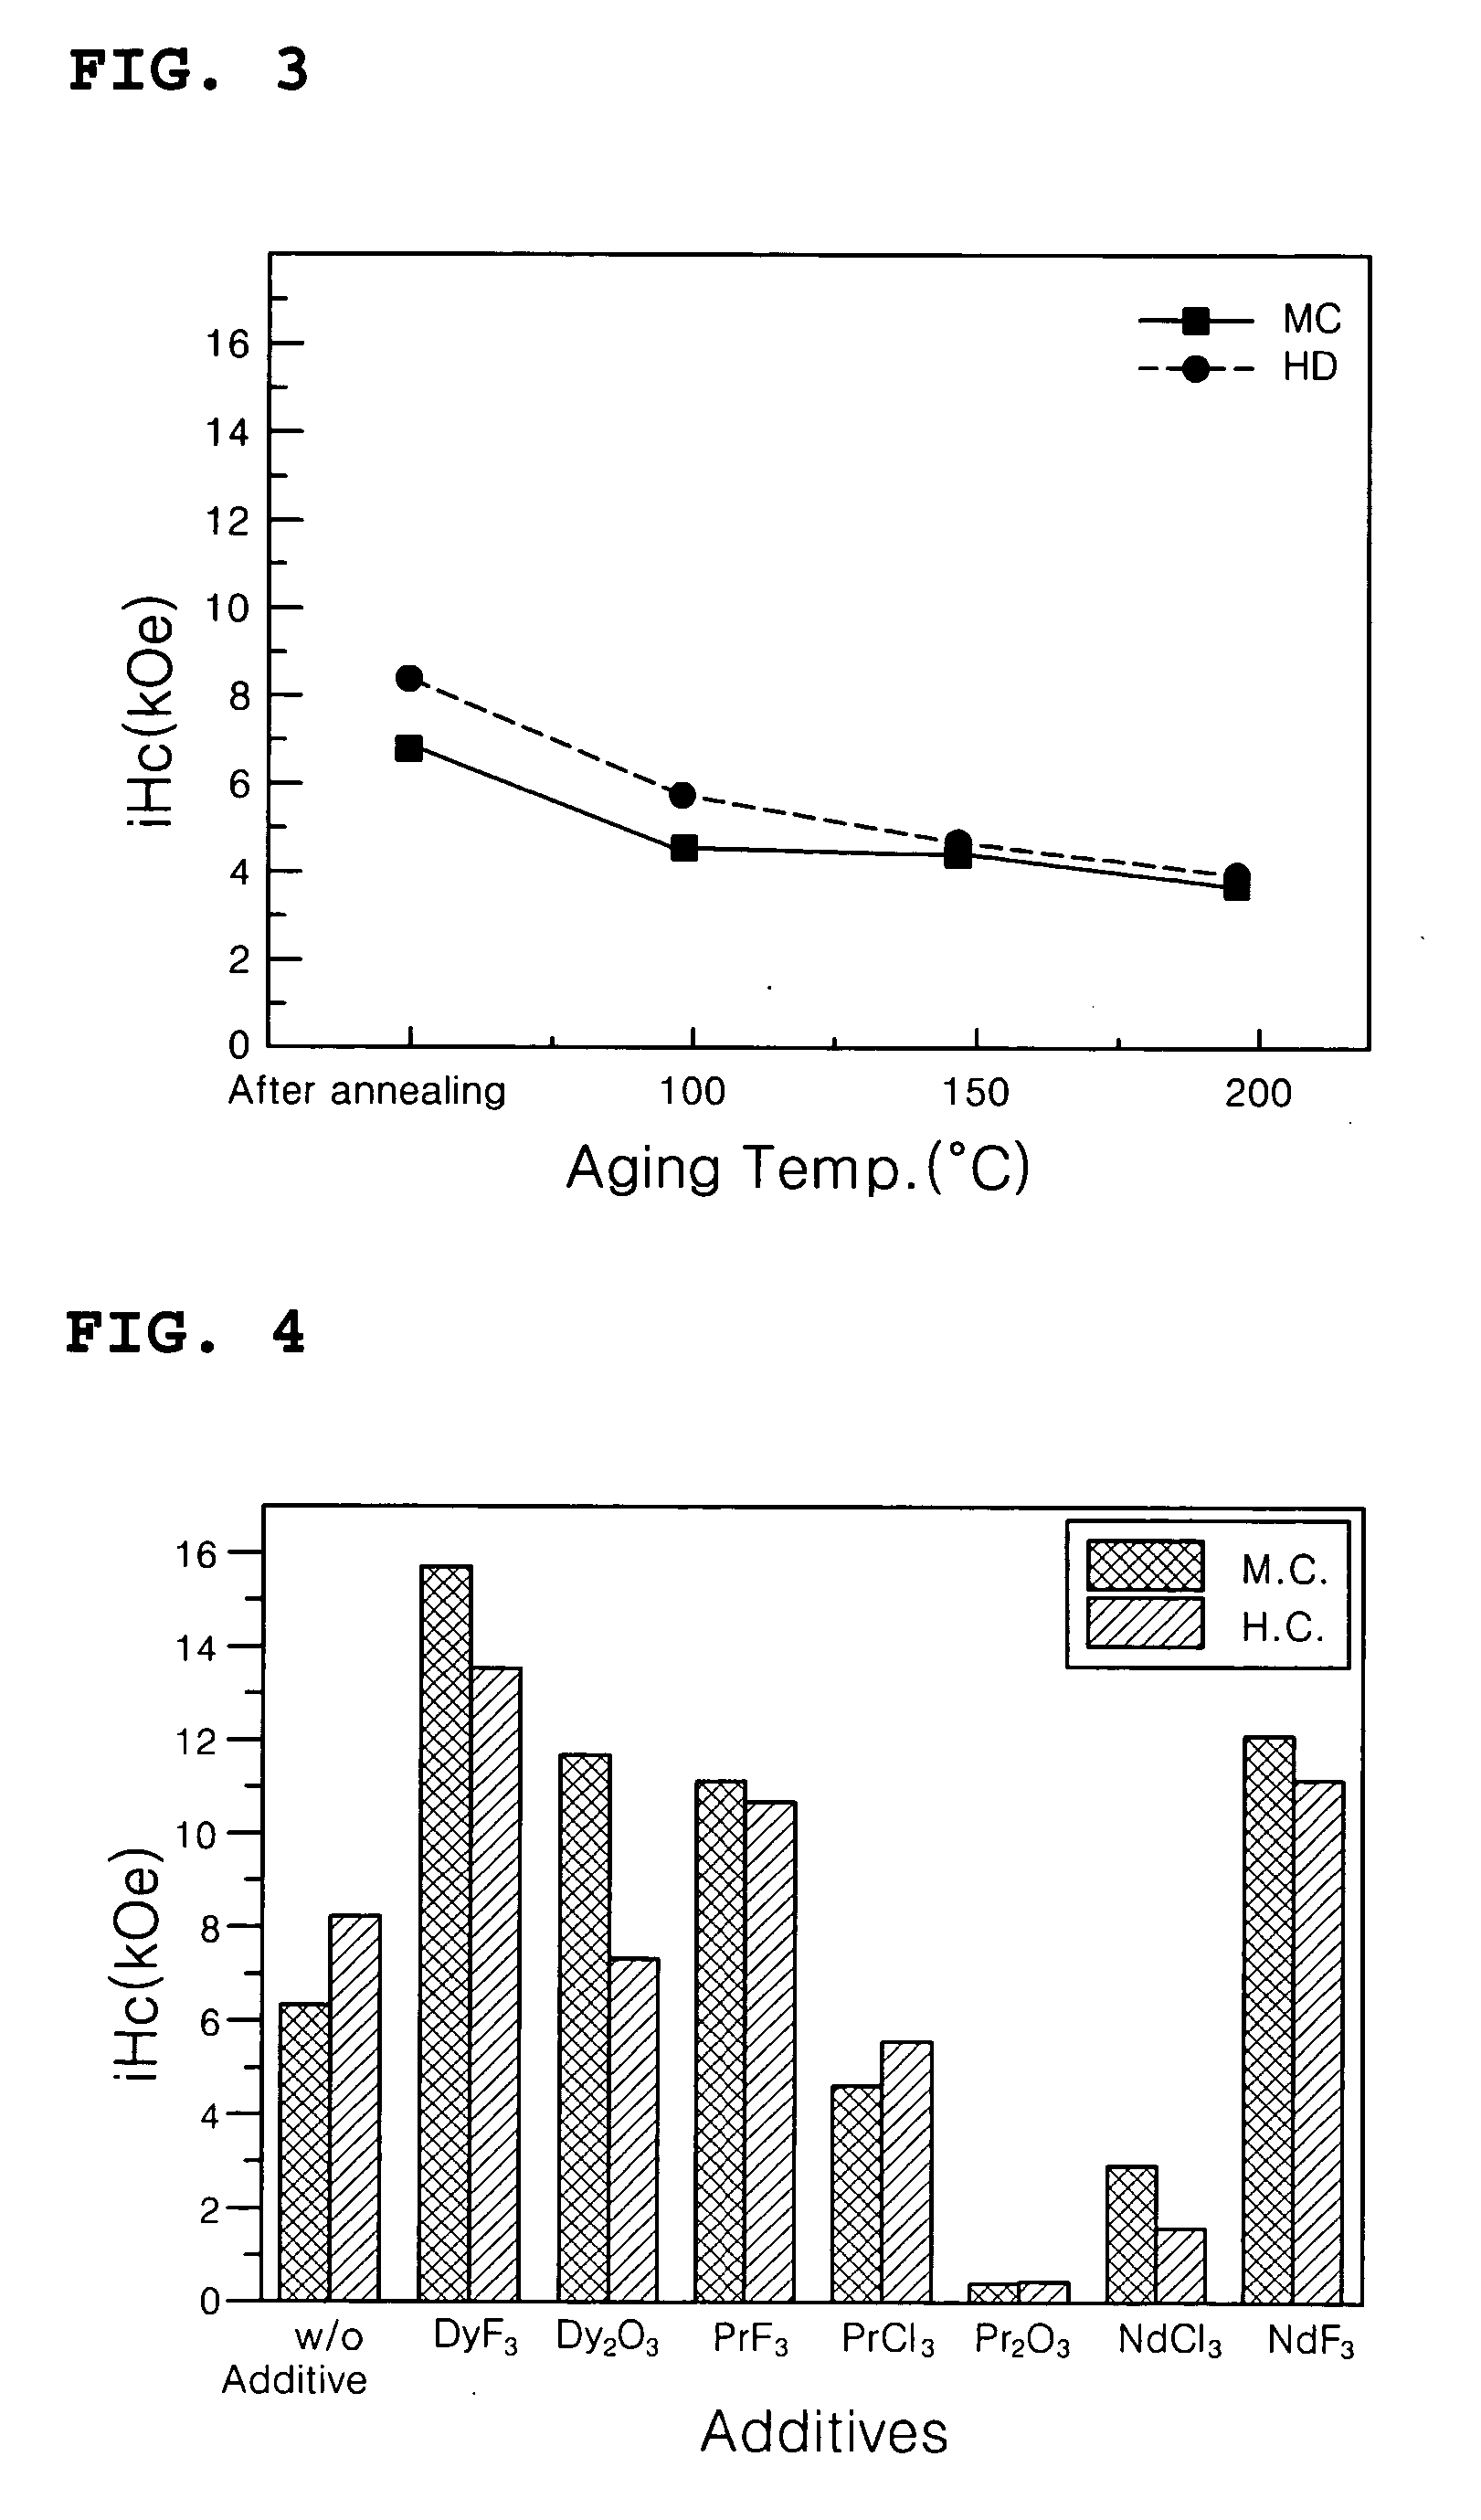 Method of preparing micro-structured powder for bonded magnets having high coercivity and magnet powder prepared by the same